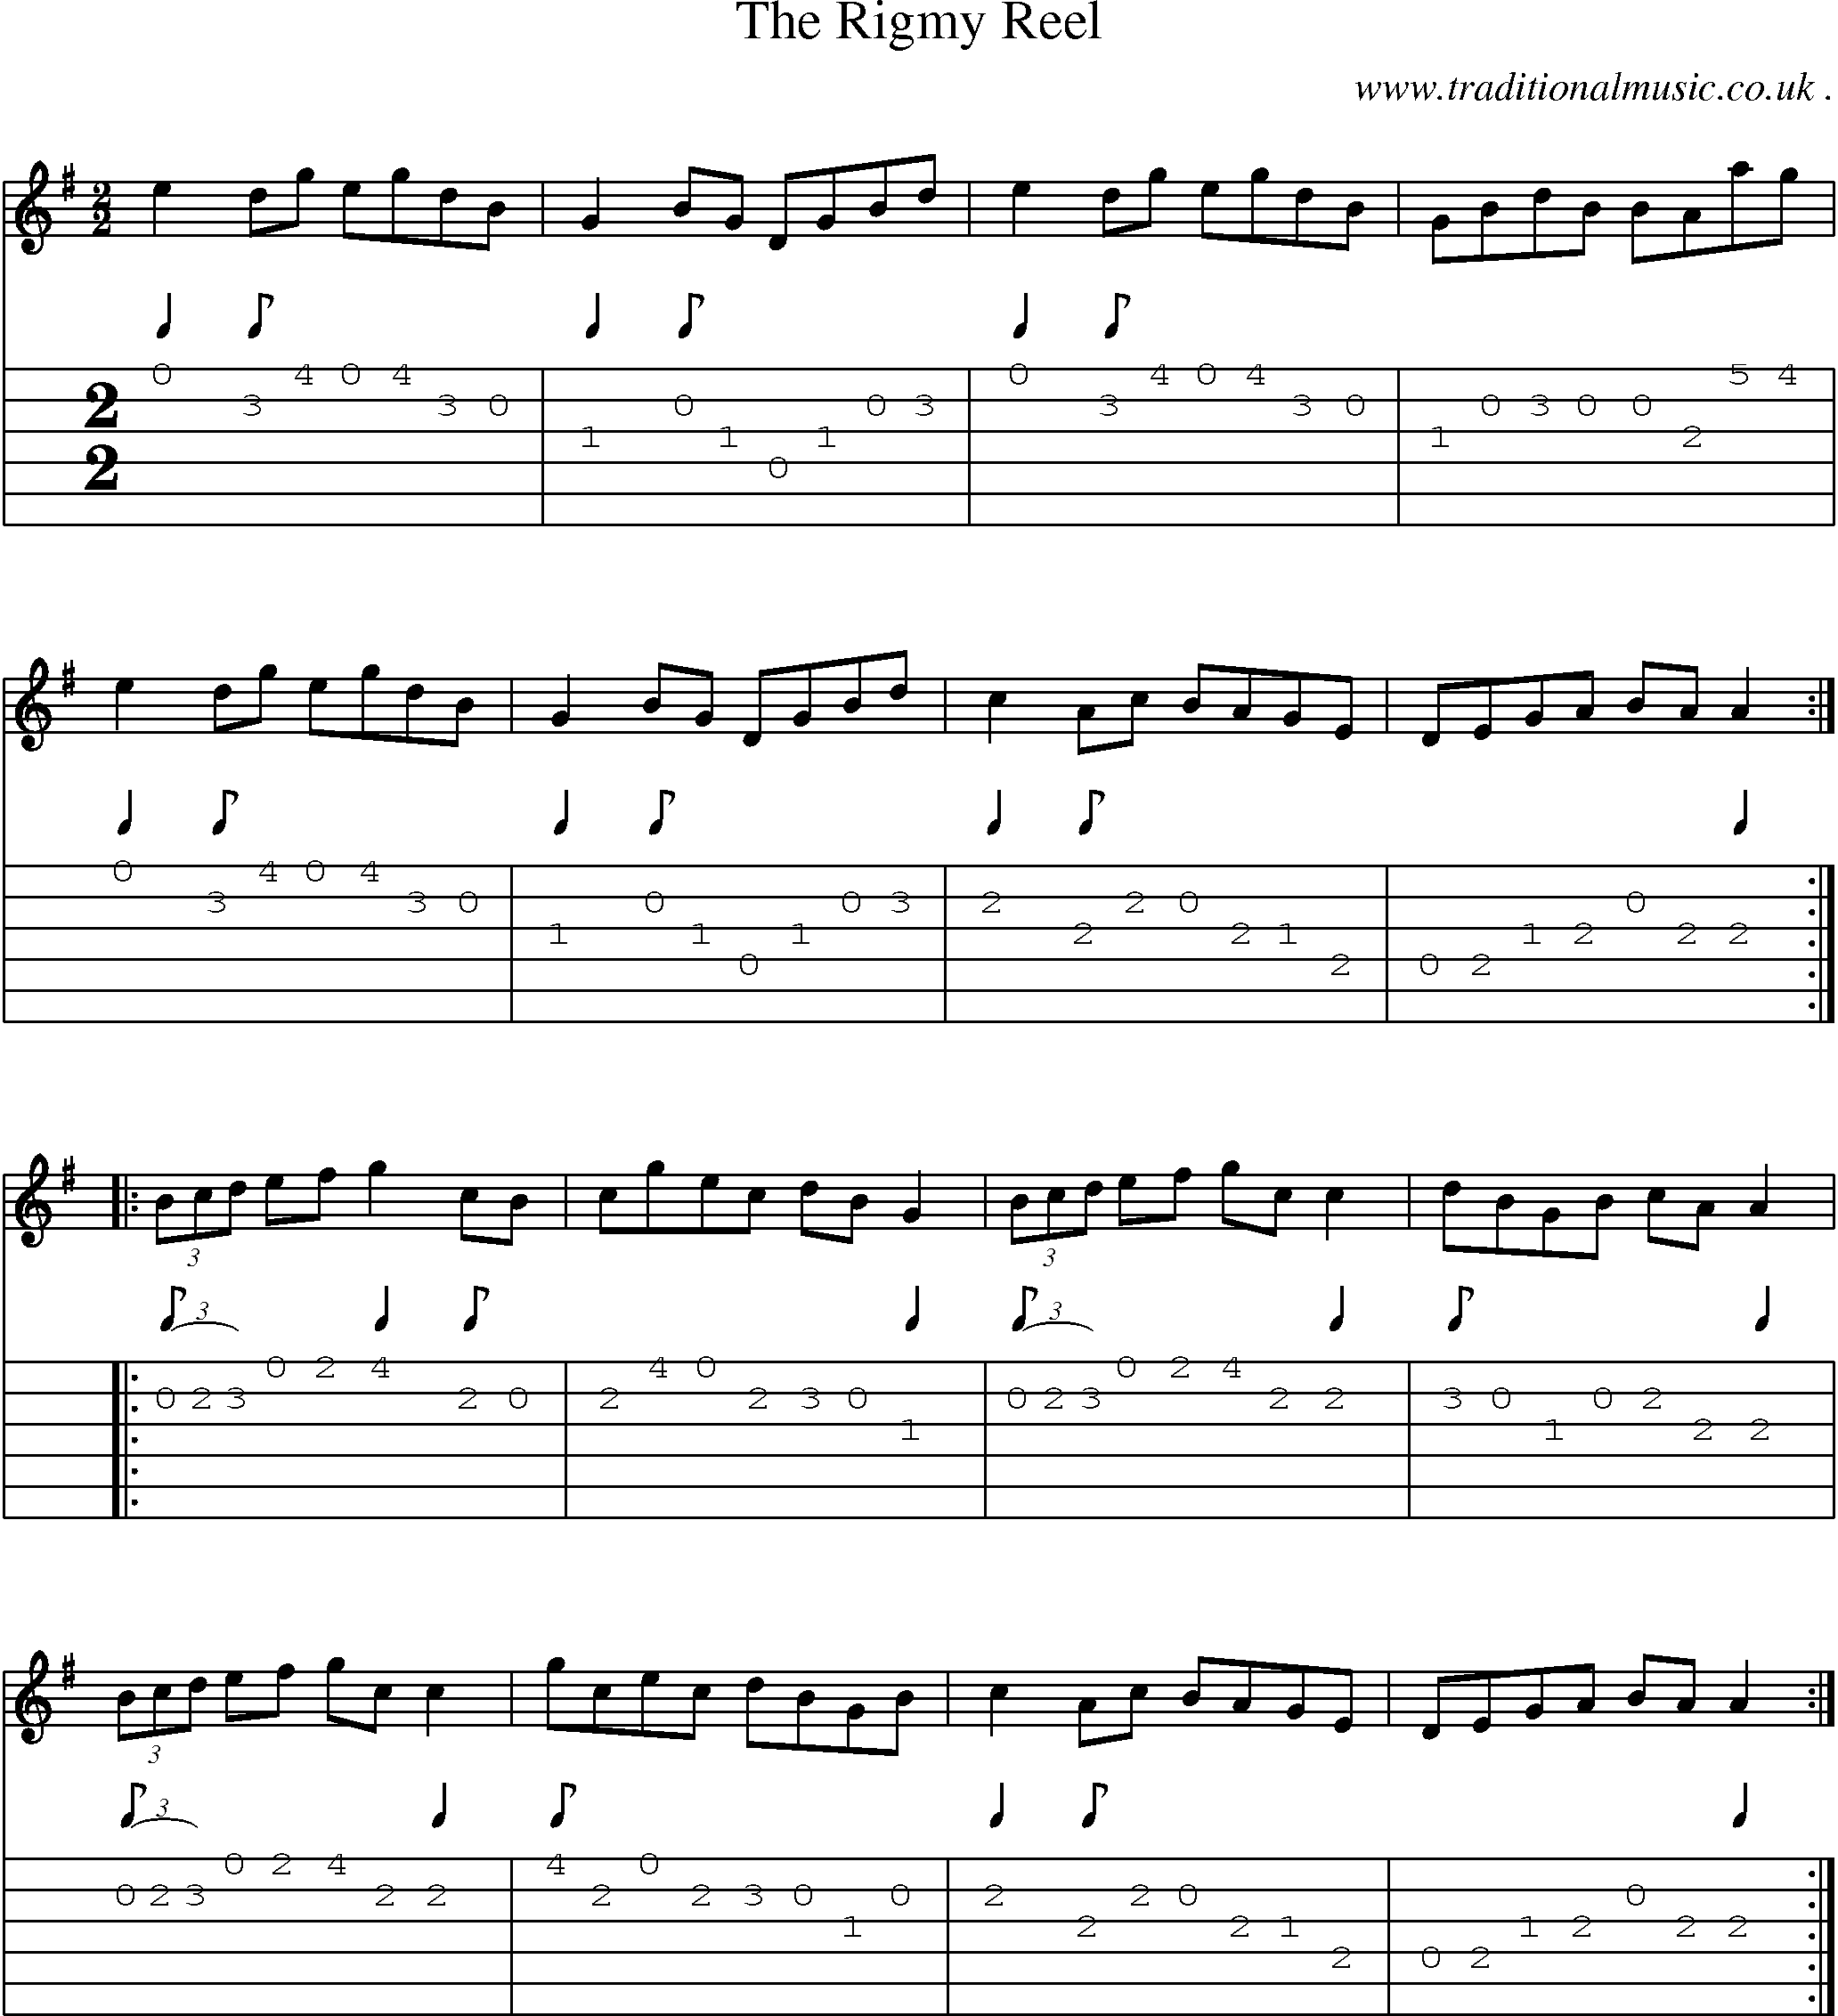 Sheet-Music and Guitar Tabs for The Rigmy Reel